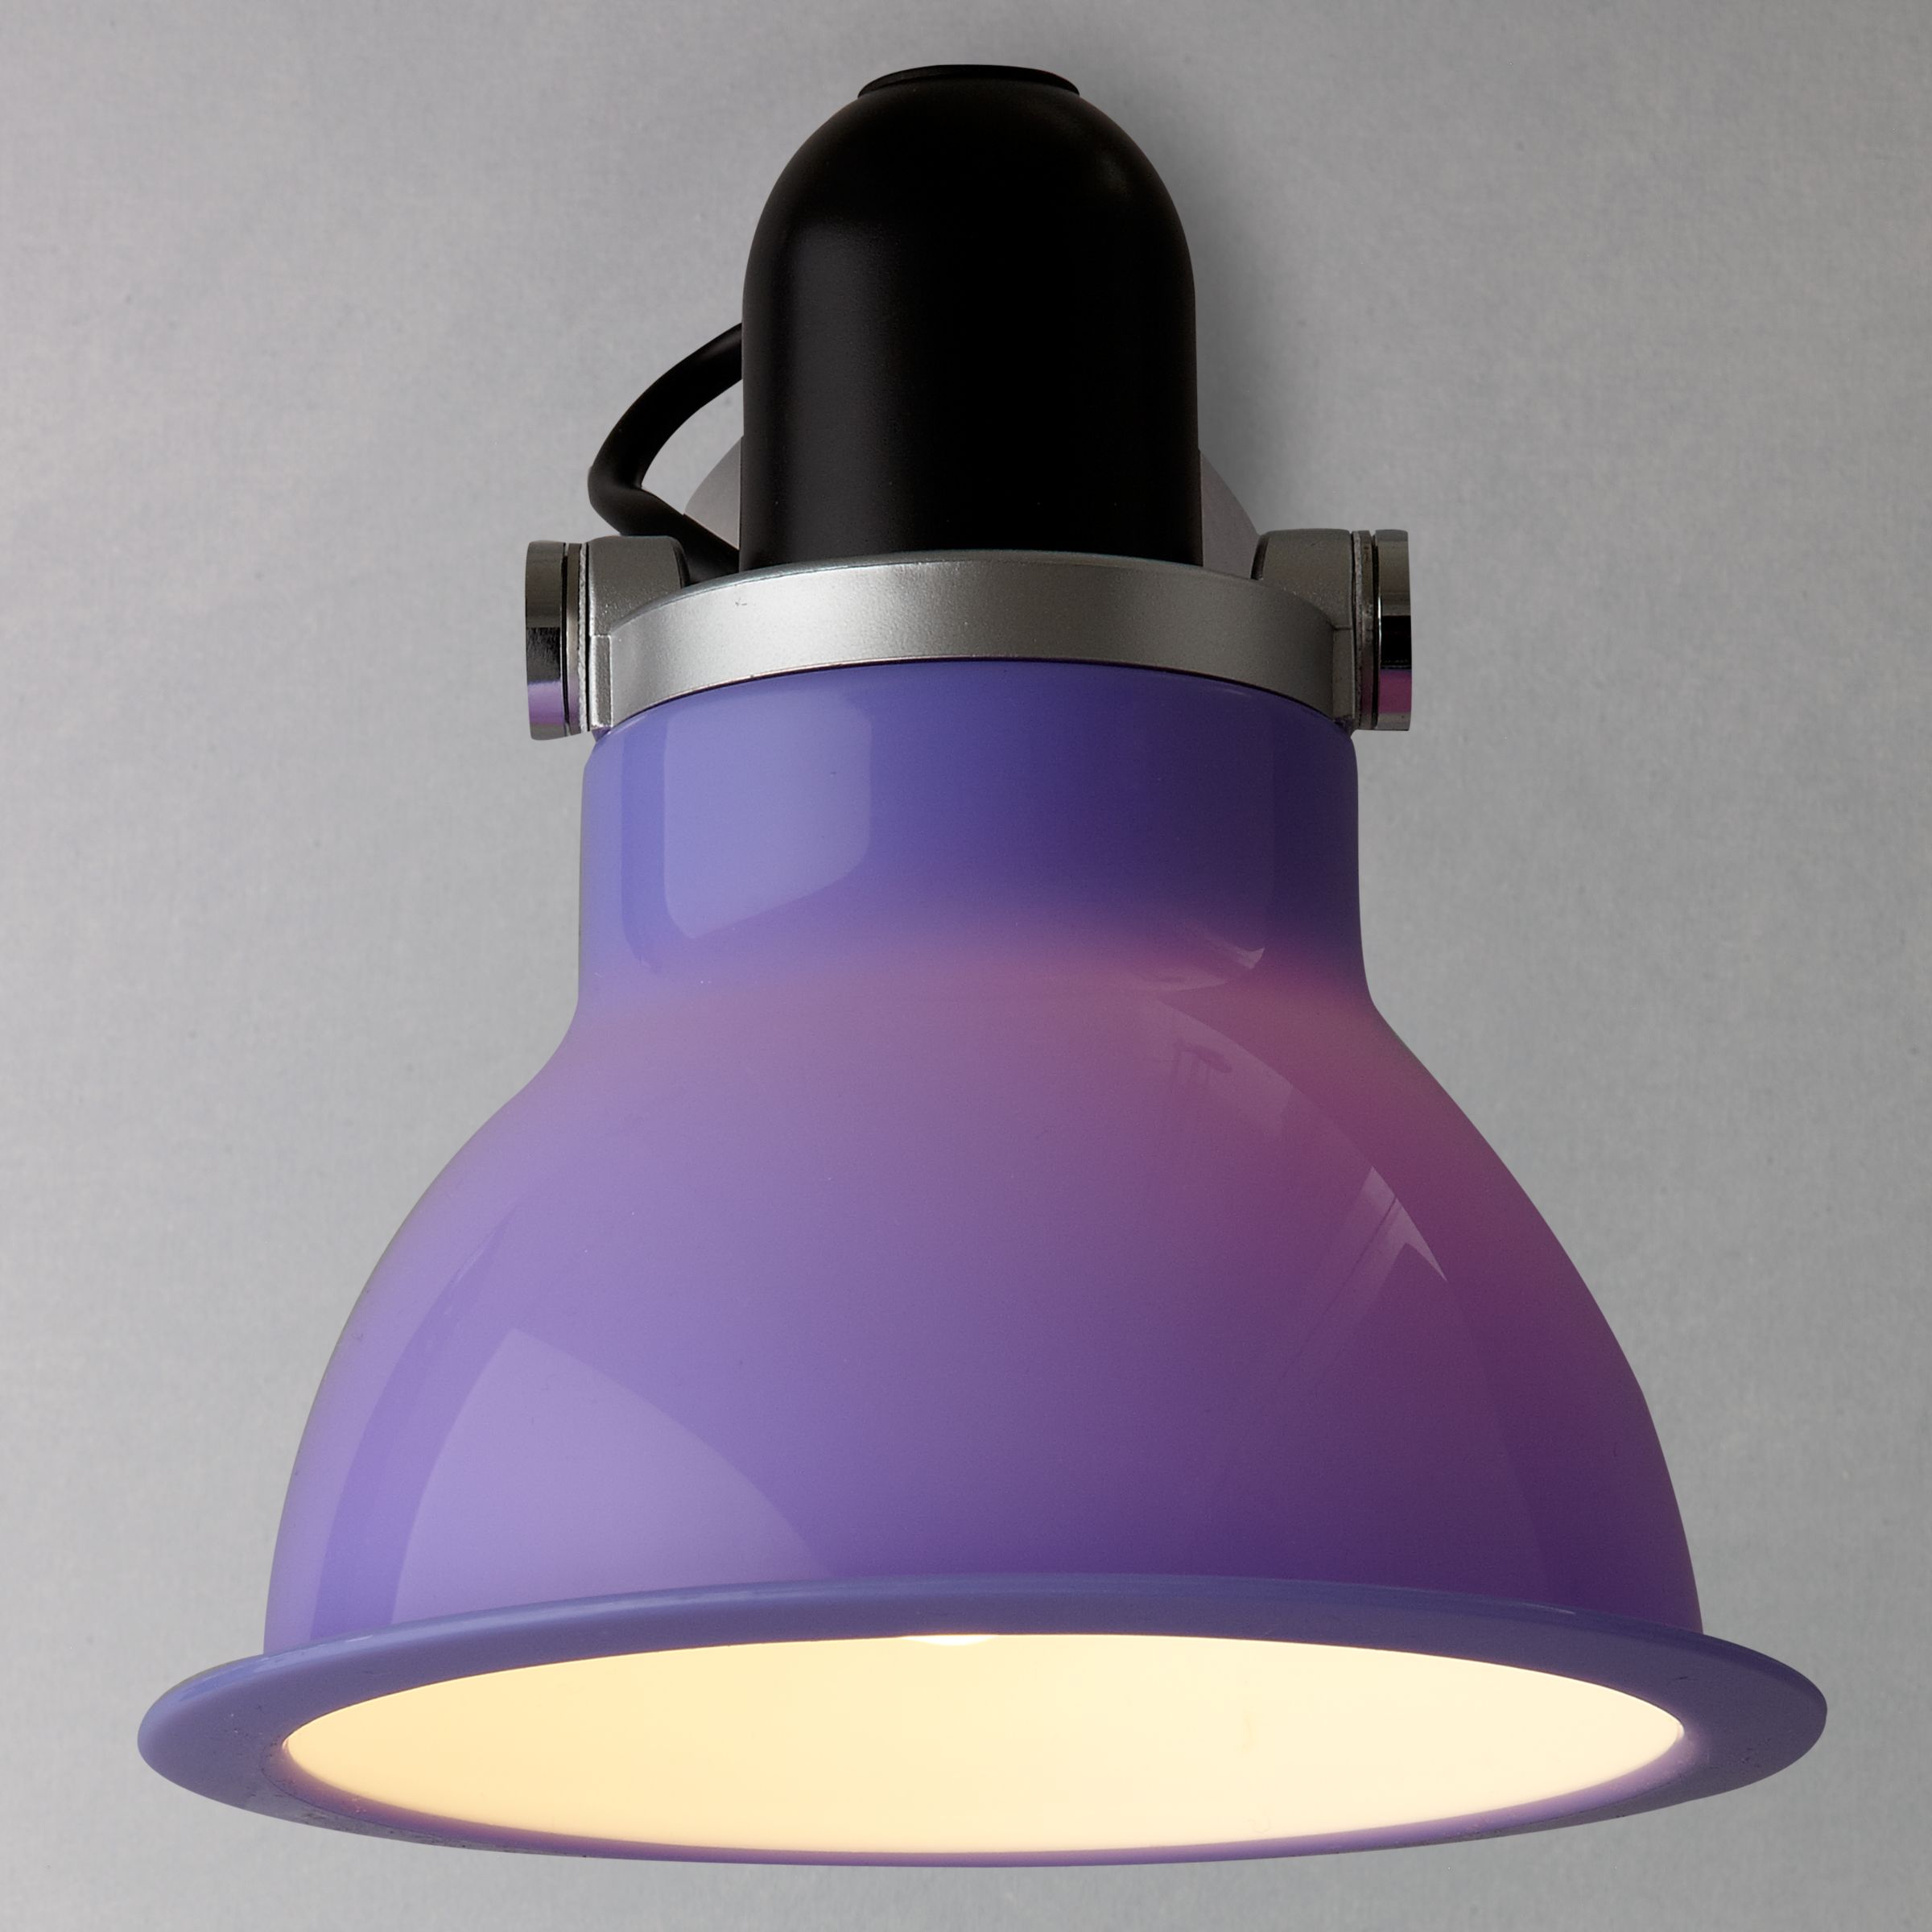 Anglepoise Type 1228 Wall Light, Lilac